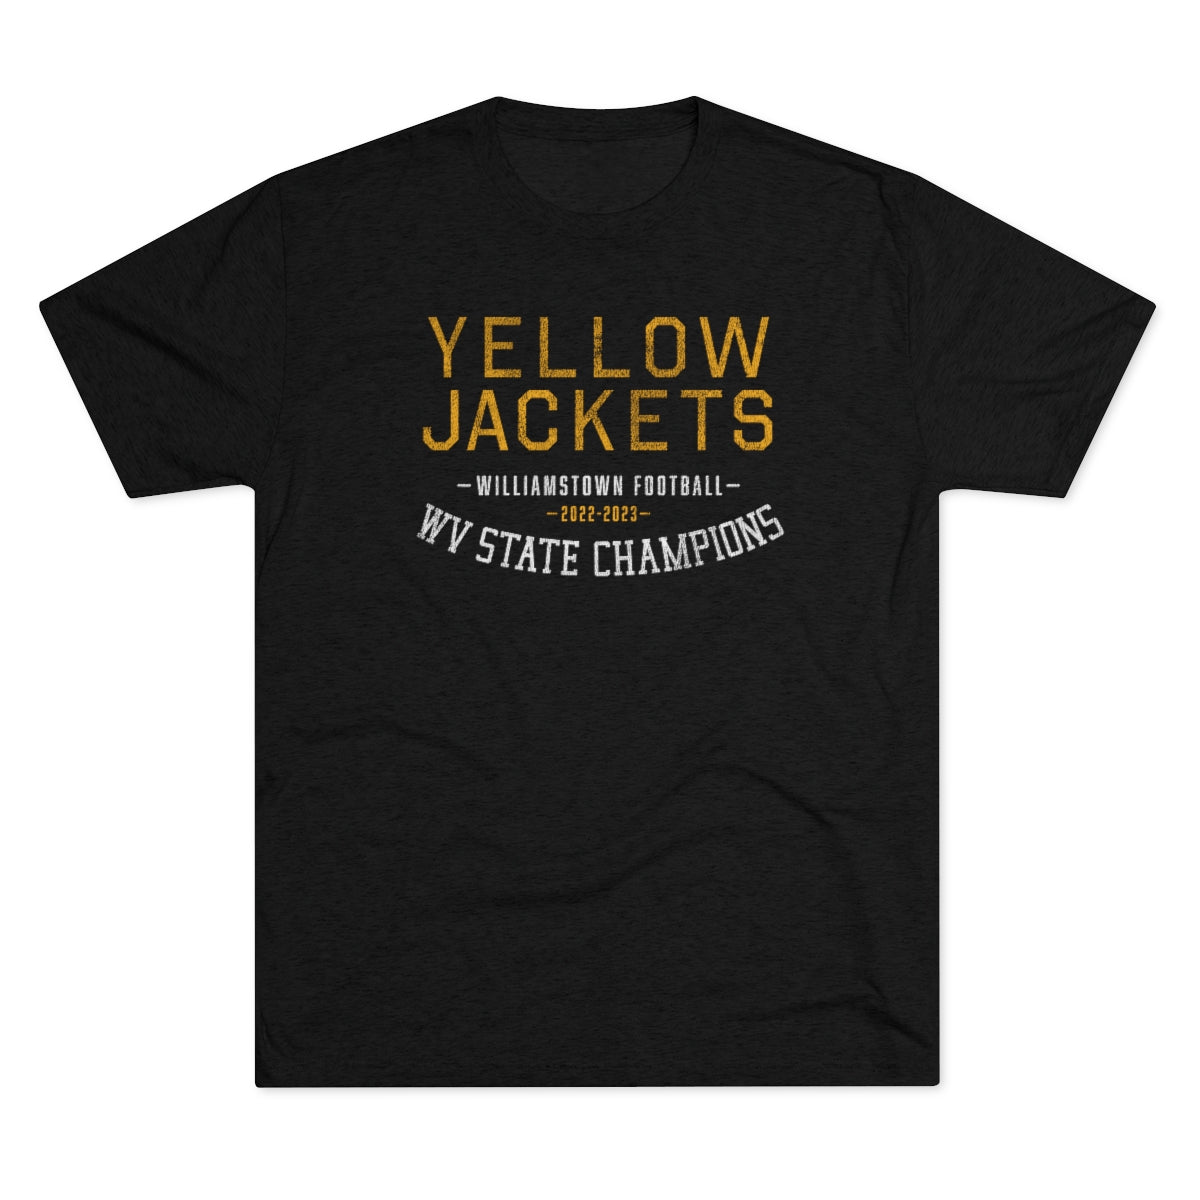 YELLOW JACKETS WV STATE CHAMPIONS-Unisex Tri-Blend Crew Tee